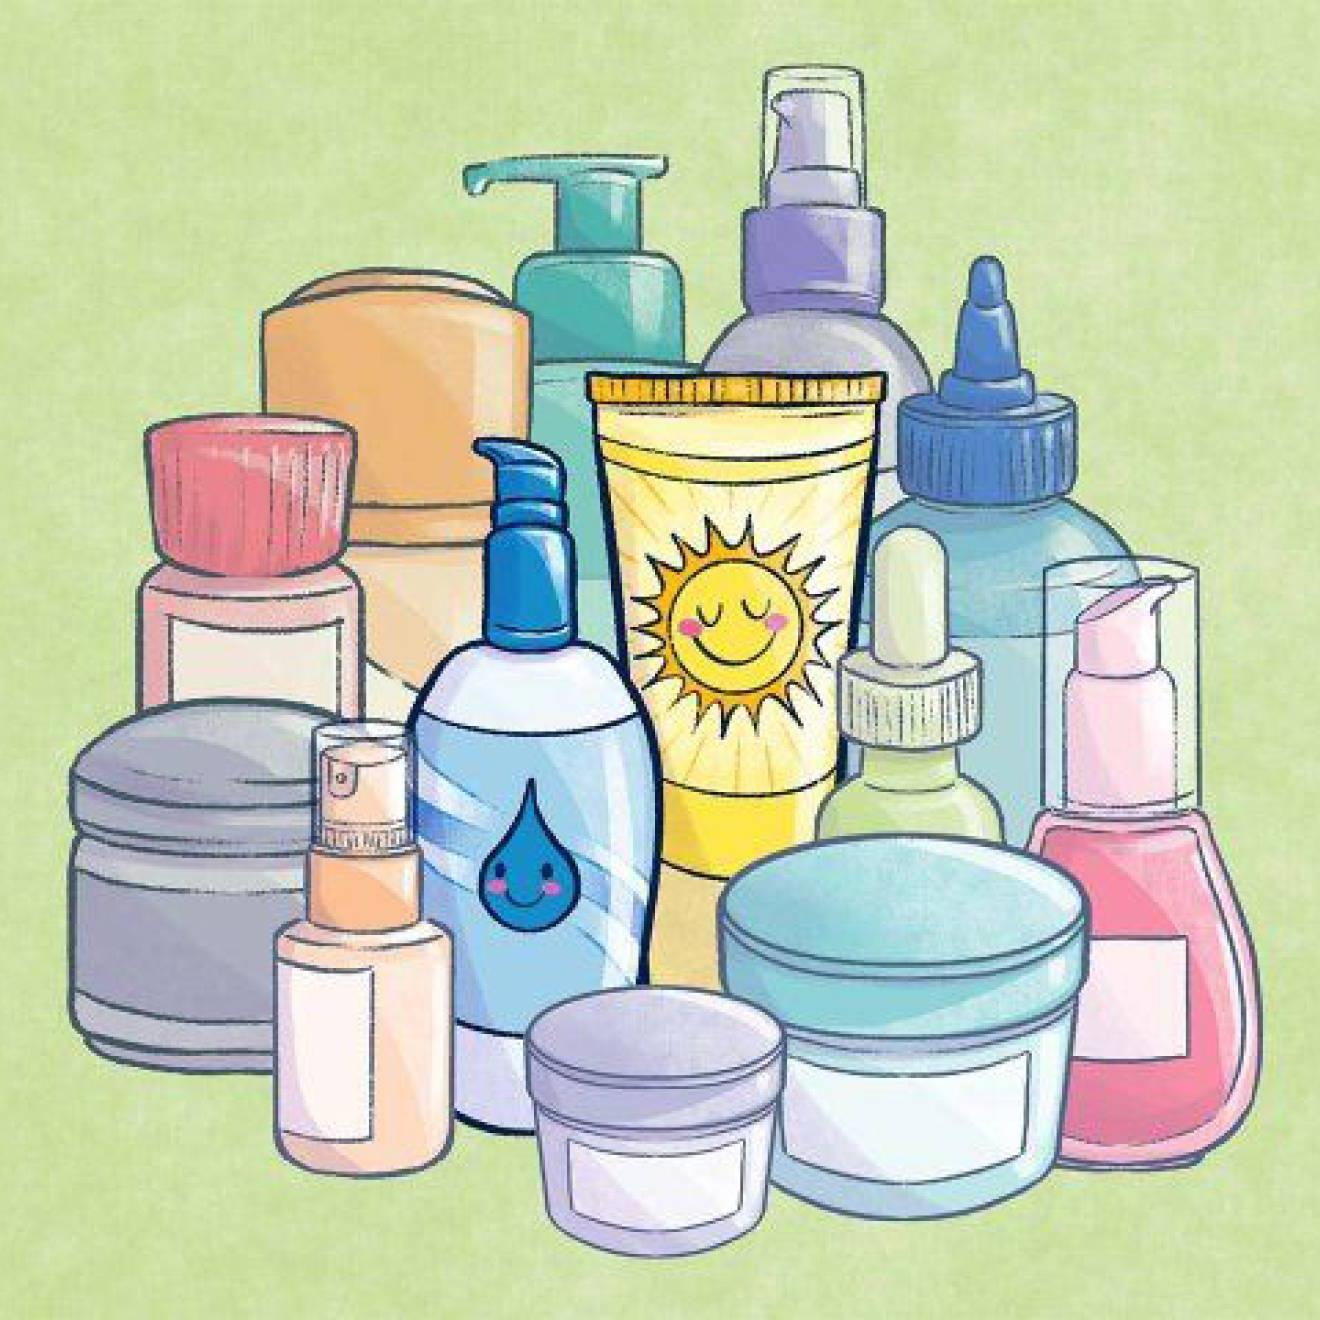 An illustration of skin care products